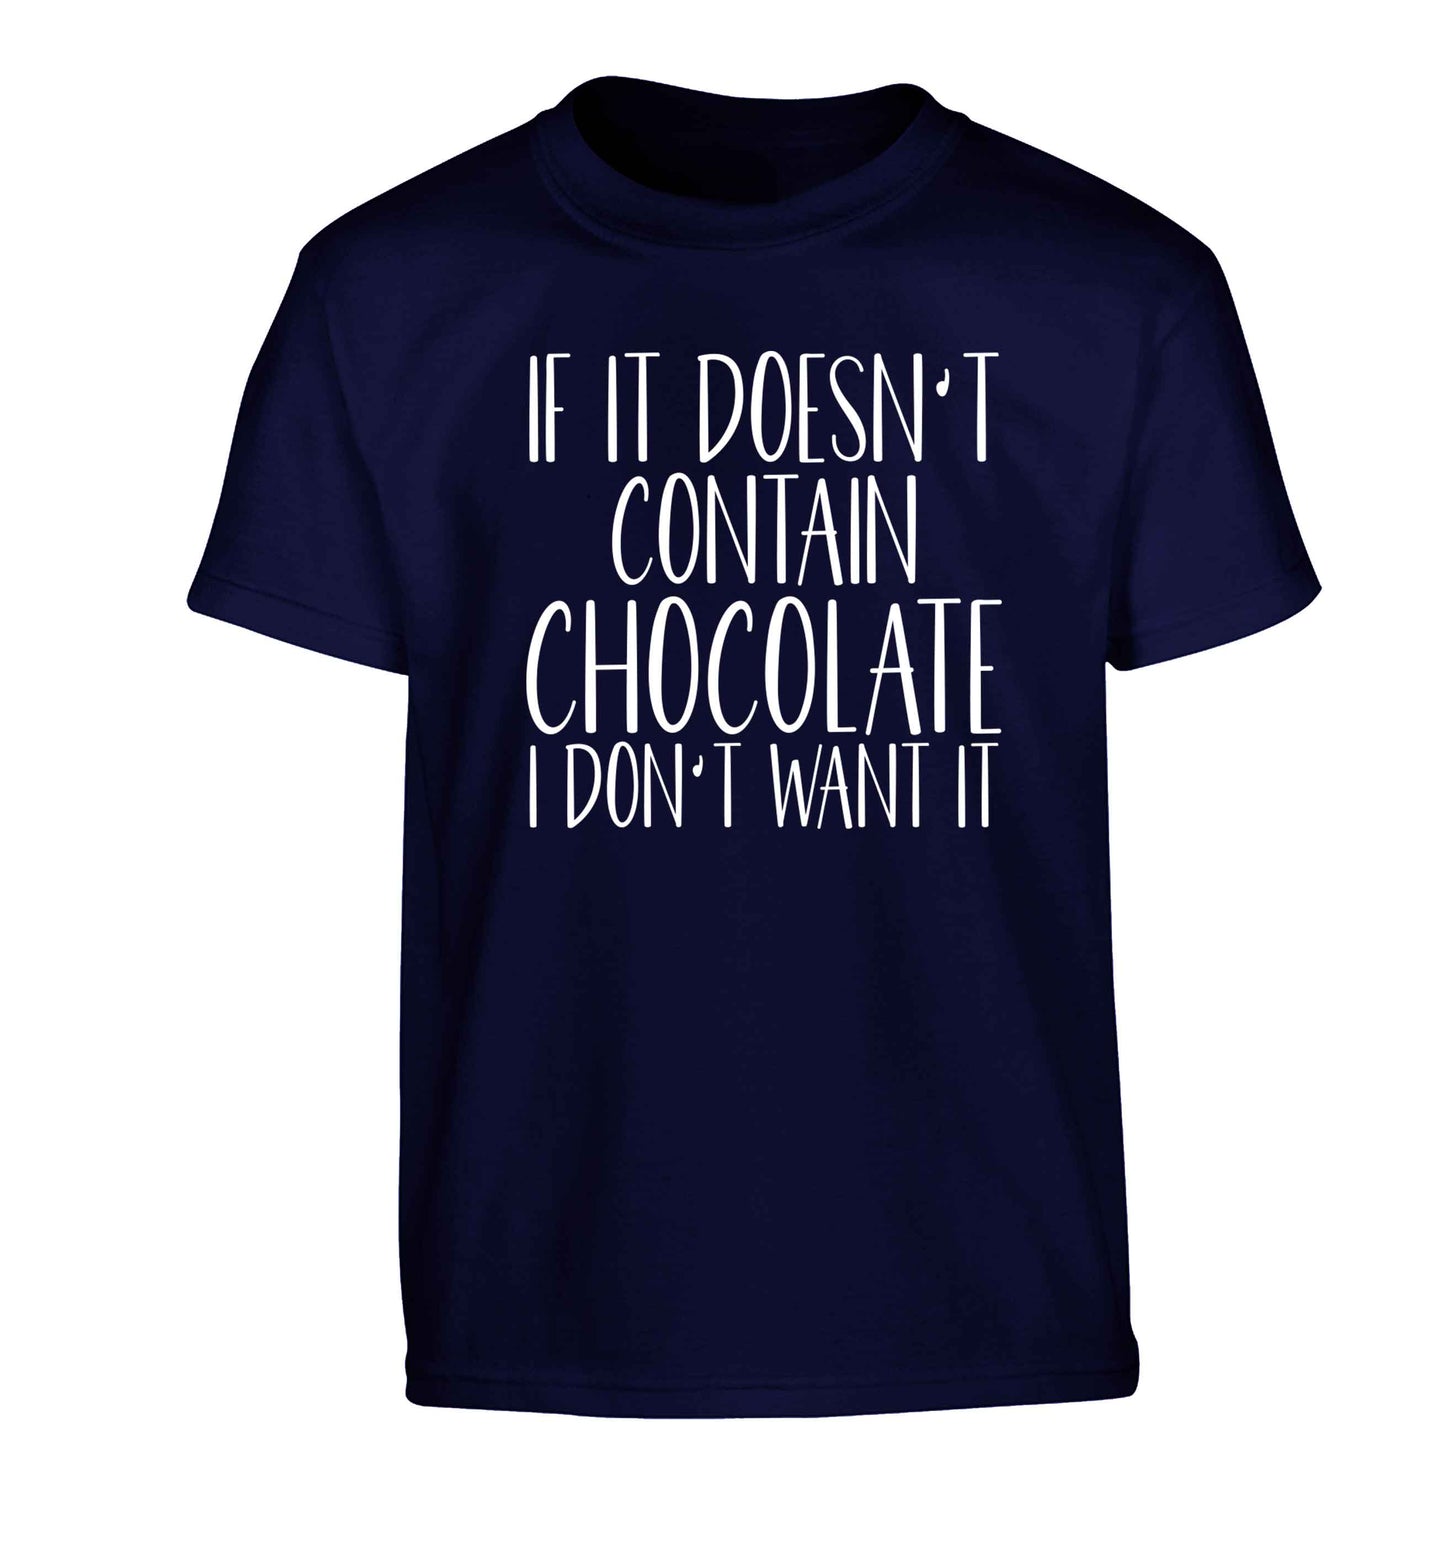 If it doesn't contain chocolate I don't want it Children's navy Tshirt 12-13 Years